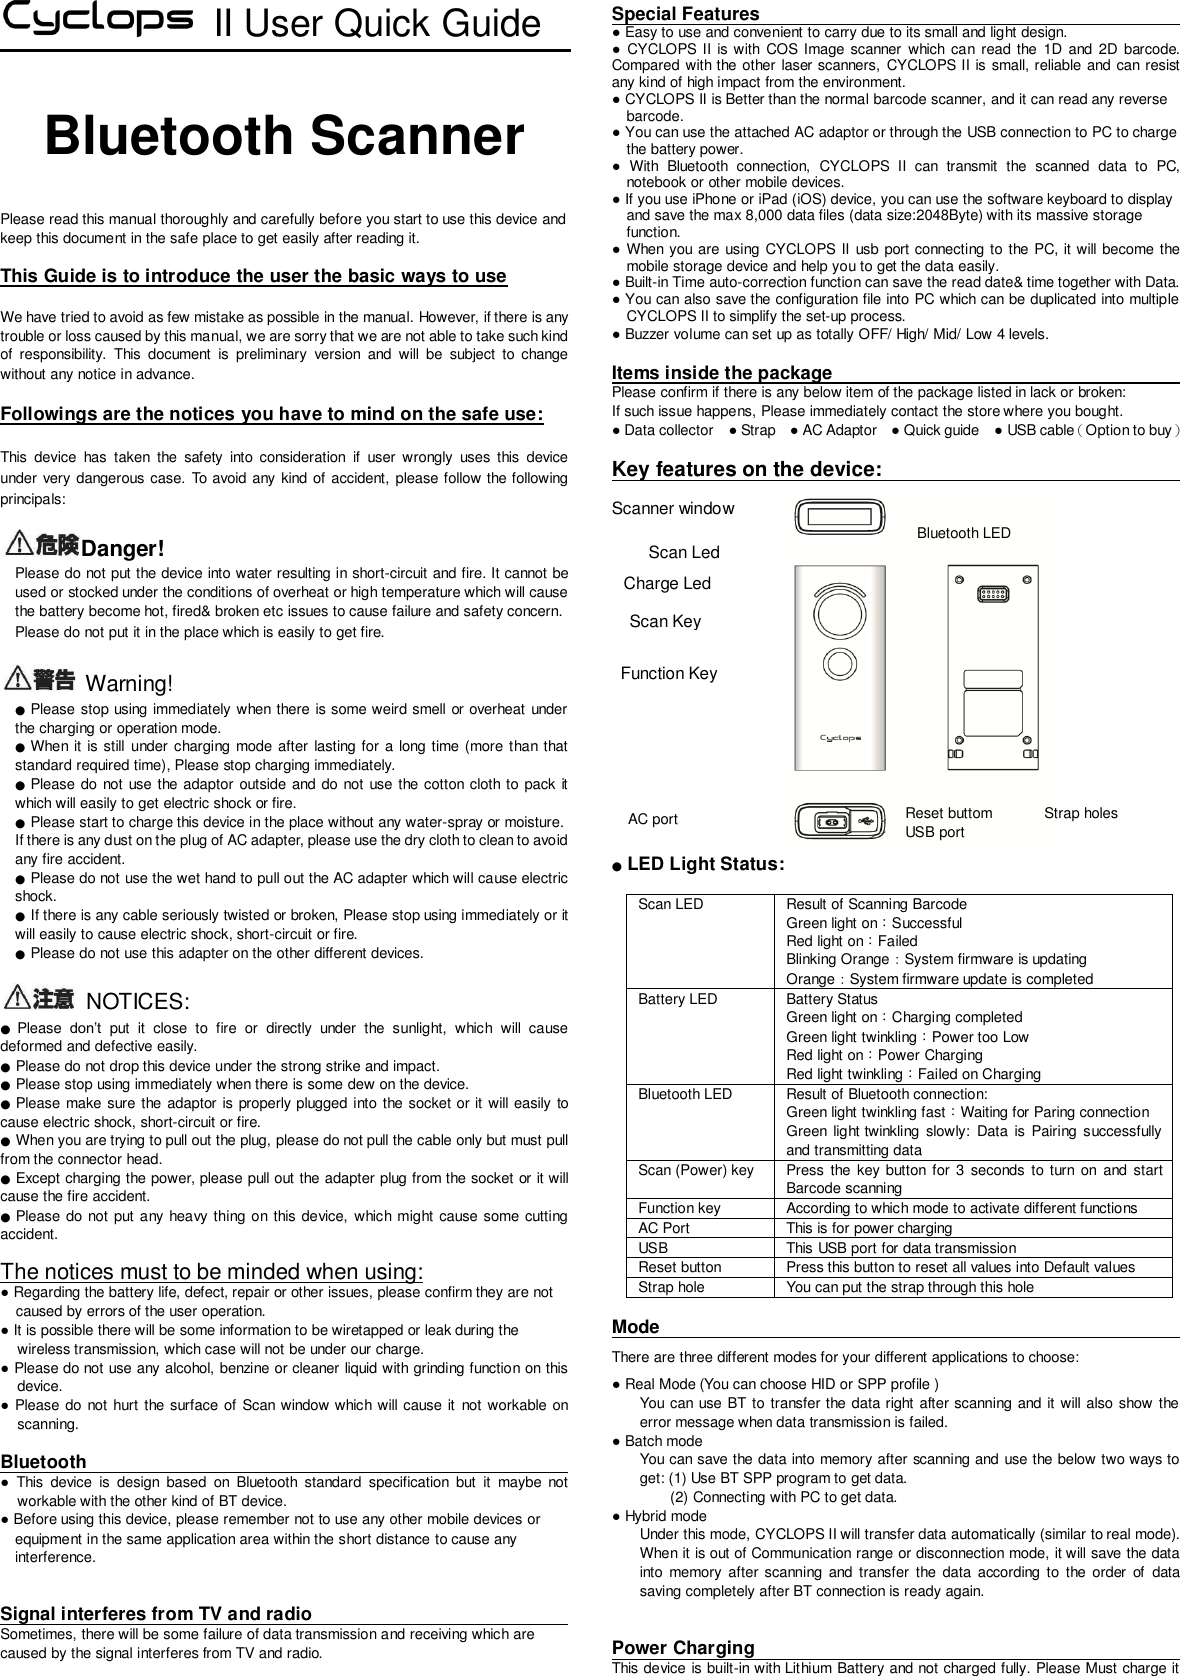  II User Quick Guide  Bluetooth Scanner   Please read this manual thoroughly and carefully before you start to use this device and keep this document in the safe place to get easily after reading it.      This Guide is to introduce the user the basic ways to use  We have tried to avoid as few mistake as possible in the manual. However, if there is any trouble or loss caused by this manual, we are sorry that we are not able to take such kind of  responsibility.  This  document  is  preliminary  version  and  will  be  subject  to  change without any notice in advance.    Followings are the notices you have to mind on the safe use:  This  device  has  taken  the  safety  into  consideration  if  user  wrongly  uses  this  device under very dangerous case. To avoid any kind of accident, please follow the following principals:  Danger!  Please do not put the device into water resulting in short-circuit and fire. It cannot be used or stocked under the conditions of overheat or high temperature which will cause the battery become hot, fired&amp; broken etc issues to cause failure and safety concern.      Please do not put it in the place which is easily to get fire.      Warning! ● Please stop using immediately when there is some weird smell or overheat under the charging or operation mode.   ● When it is still under charging mode after lasting for a long time (more than that standard required time), Please stop charging immediately. ● Please do not  use the adaptor outside and do not use the cotton cloth to pack it which will easily to get electric shock or fire.   ● Please start to charge this device in the place without any water-spray or moisture.   If there is any dust on the plug of AC adapter, please use the dry cloth to clean to avoid any fire accident.   ● Please do not use the wet hand to pull out the AC adapter which will cause electric shock.   ● If there is any cable seriously twisted or broken, Please stop using immediately or it will easily to cause electric shock, short-circuit or fire.   ● Please do not use this adapter on the other different devices.    NOTICES: ● Please  don’t  put  it  close  to  fire  or  directly  under  the  sunlight,  which  will  cause deformed and defective easily.   ● Please do not drop this device under the strong strike and impact. ● Please stop using immediately when there is some dew on the device.   ● Please make sure the adaptor is properly plugged into the socket or it will easily to cause electric shock, short-circuit or fire.   ● When you are trying to pull out the plug, please do not pull the cable only but must pull from the connector head.  ● Except charging the power, please pull out the adapter plug from the socket or it will cause the fire accident.   ● Please do not  put any heavy thing on this  device,  which might cause some cutting accident.    The notices must to be minded when using: ● Regarding the battery life, defect, repair or other issues, please confirm they are not caused by errors of the user operation.   ● It is possible there will be some information to be wiretapped or leak during the wireless transmission, which case will not be under our charge.   ● Please do not use any alcohol, benzine or cleaner liquid with grinding function on this device.     ● Please do not hurt the surface of Scan window which will cause it  not workable on scanning.    Bluetooth                                    ●  This  device  is  design  based  on  Bluetooth  standard  specification  but  it  maybe  not workable with the other kind of BT device.     ● Before using this device, please remember not to use any other mobile devices or       equipment in the same application area within the short distance to cause any       interference.    Signal interferes from TV and radio                                                 Sometimes, there will be some failure of data transmission and receiving which are caused by the signal interferes from TV and radio.  Special Features                                        ● Easy to use and convenient to carry due to its small and light design. ●  CYCLOPS II is with  COS  Image  scanner  which  can  read the  1D and 2D  barcode. Compared with the other  laser scanners,  CYCLOPS II is small, reliable and can resist any kind of high impact from the environment.   ● CYCLOPS II is Better than the normal barcode scanner, and it can read any reverse       barcode.   ● You can use the attached AC adaptor or through the USB connection to PC to charge     the battery power.   ●  With  Bluetooth  connection,  CYCLOPS  II  can  transmit  the  scanned  data  to  PC, notebook or other mobile devices.   ● If you use iPhone or iPad (iOS) device, you can use the software keyboard to display       and save the max 8,000 data files (data size:2048Byte) with its massive storage     function. ● When you are using  CYCLOPS II usb port connecting to the PC, it will become the mobile storage device and help you to get the data easily.   ● Built-in Time auto-correction function can save the read date&amp; time together with Data.   ● You can also save the configuration file into PC which can be duplicated into multiple CYCLOPS II to simplify the set-up process. ● Buzzer volume can set up as totally OFF/ High/ Mid/ Low 4 levels.    Items inside the package                                                     Please confirm if there is any below item of the package listed in lack or broken:   If such issue happens, Please immediately contact the store where you bought.   ● Data collector  ● Strap  ● AC Adaptor  ● Quick guide  ● USB cable（Option to buy）  Key features on the device:                                 Scanner window                   ● LED Light Status:  Scan LED Result of Scanning Barcode     Green light on：Successful   Red light on：Failed   Blinking Orange：System firmware is updating Orange：System firmware update is completed Battery LED Battery Status   Green light on：Charging completed   Green light twinkling：Power too Low   Red light on：Power Charging Red light twinkling：Failed on Charging   Bluetooth LED Result of Bluetooth connection:   Green light twinkling fast：Waiting for Paring connection Green  light twinkling  slowly: Data  is  Pairing  successfully and transmitting data Scan (Power) key Press  the key button  for  3  seconds  to turn  on and  start Barcode scanning Function key According to which mode to activate different functions AC Port This is for power charging USB This USB port for data transmission Reset button Press this button to reset all values into Default values Strap hole You can put the strap through this hole  Mode                                There are three different modes for your different applications to choose: ● Real Mode (You can choose HID or SPP profile )   You can use BT to transfer the data right after scanning and it will also show the error message when data transmission is failed.   ● Batch mode   You can save the data into memory after scanning and use the below two ways to get: (1) Use BT SPP program to get data. (2) Connecting with PC to get data.   ● Hybrid mode Under this mode, CYCLOPS II will transfer data automatically (similar to real mode). When it is out of Communication range or disconnection mode, it will save the data into  memory  after scanning  and  transfer  the  data  according  to  the  order  of  data saving completely after BT connection is ready again.     Power Charging                                       This device is built-in with Lithium Battery and not charged fully. Please Must charge it Bluetooth LED Scan Led   AC port Reset buttom USB port Strap holes Charge Led Scan Key Function Key 